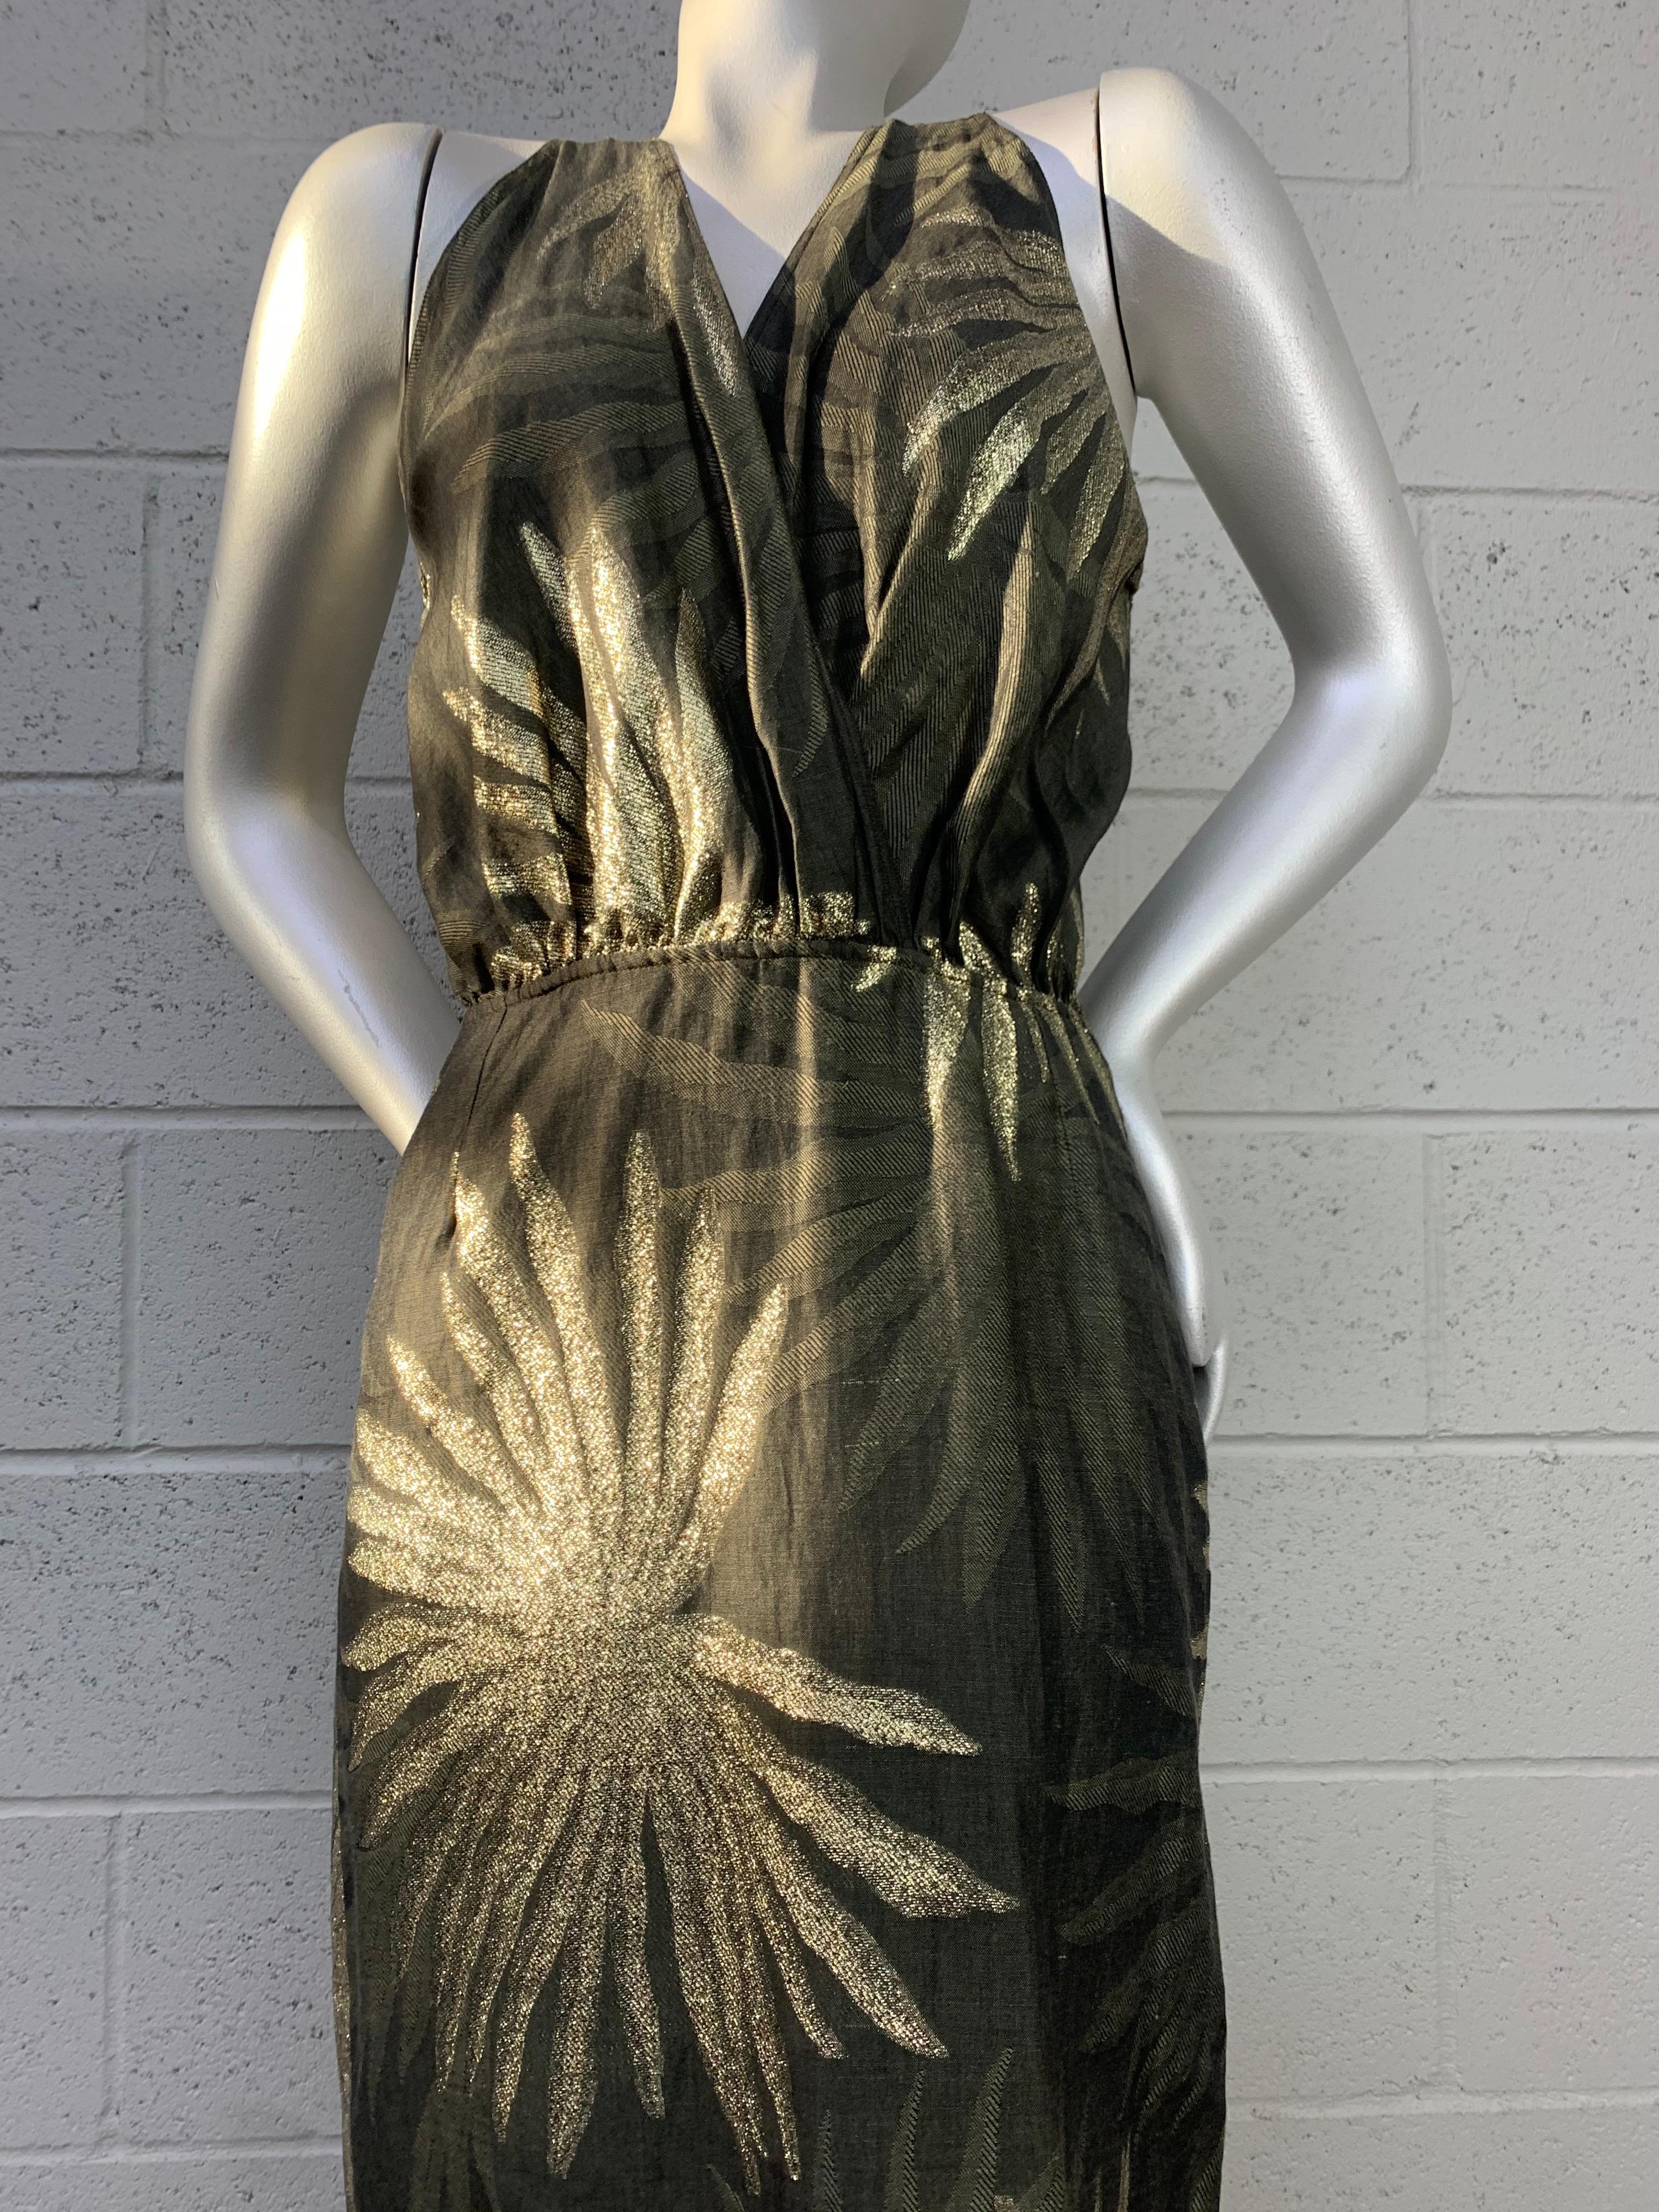 1980s Pancaldi Linen & Lame Criss-Cross Open-Back Halter Gown w/ Palm Leaf Motif In Excellent Condition For Sale In Gresham, OR